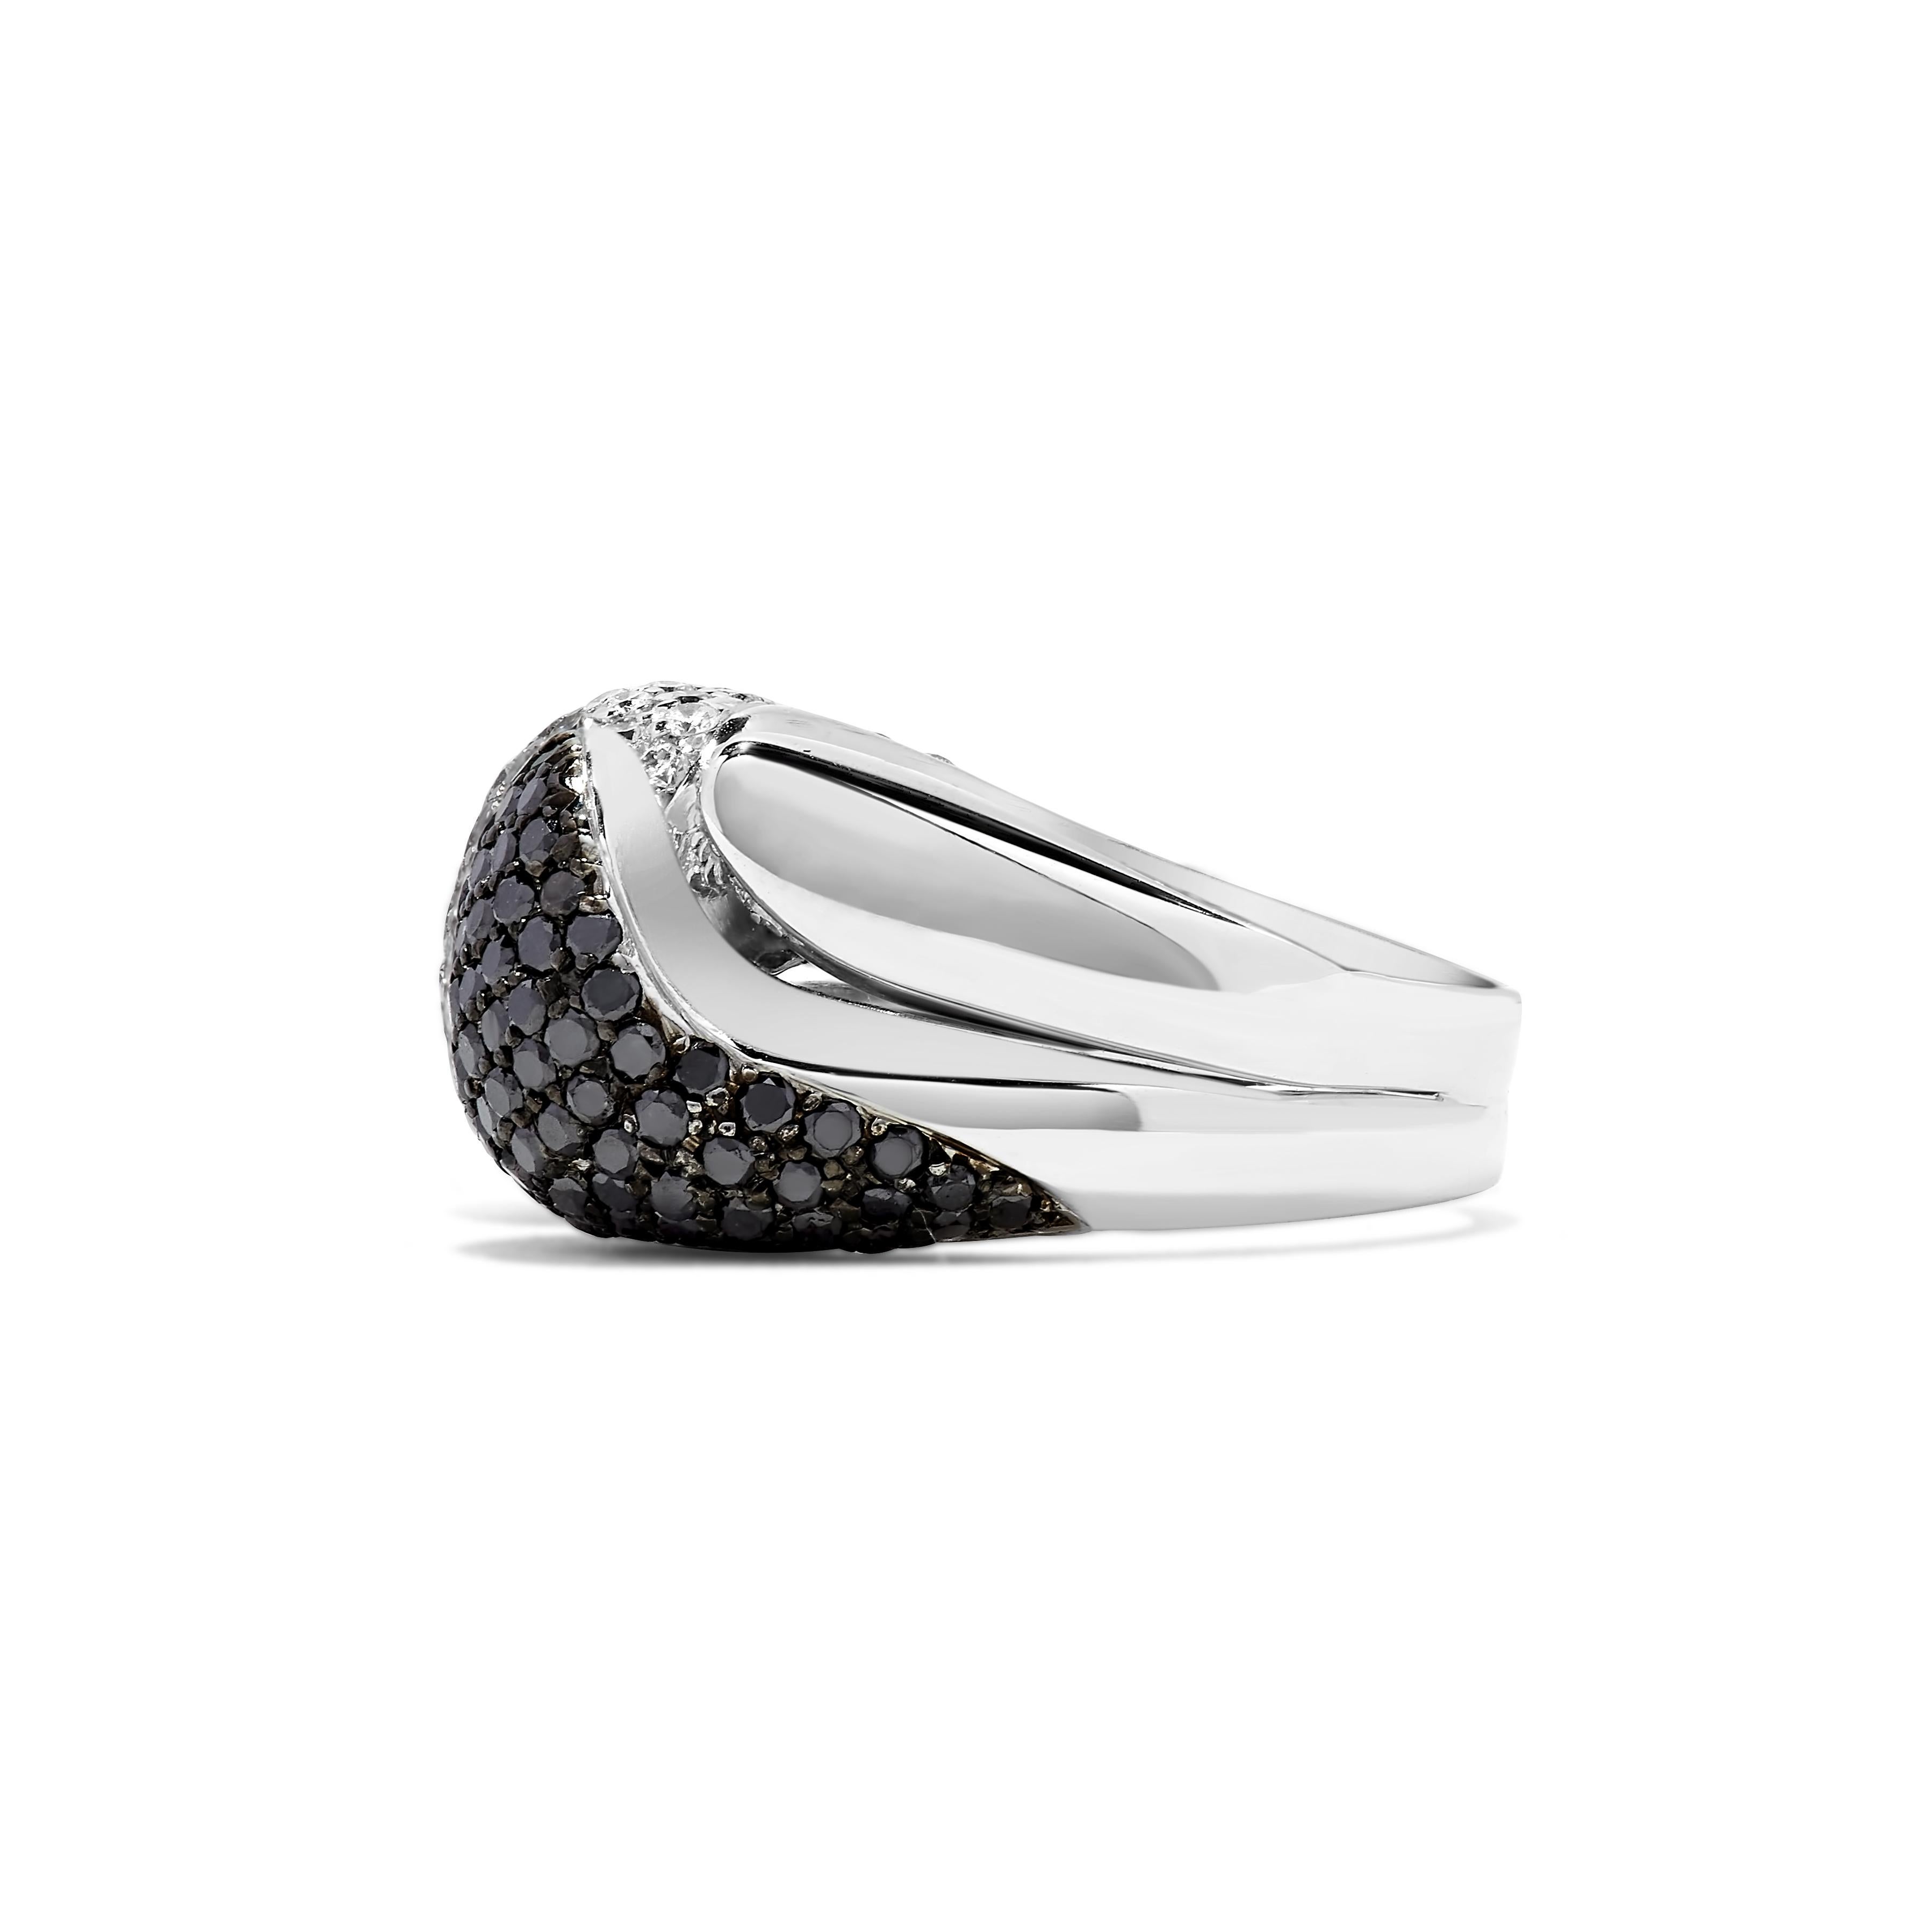 This cocktail ring features approximately 0.50 carats of black and white diamonds set in 18K white gold. 